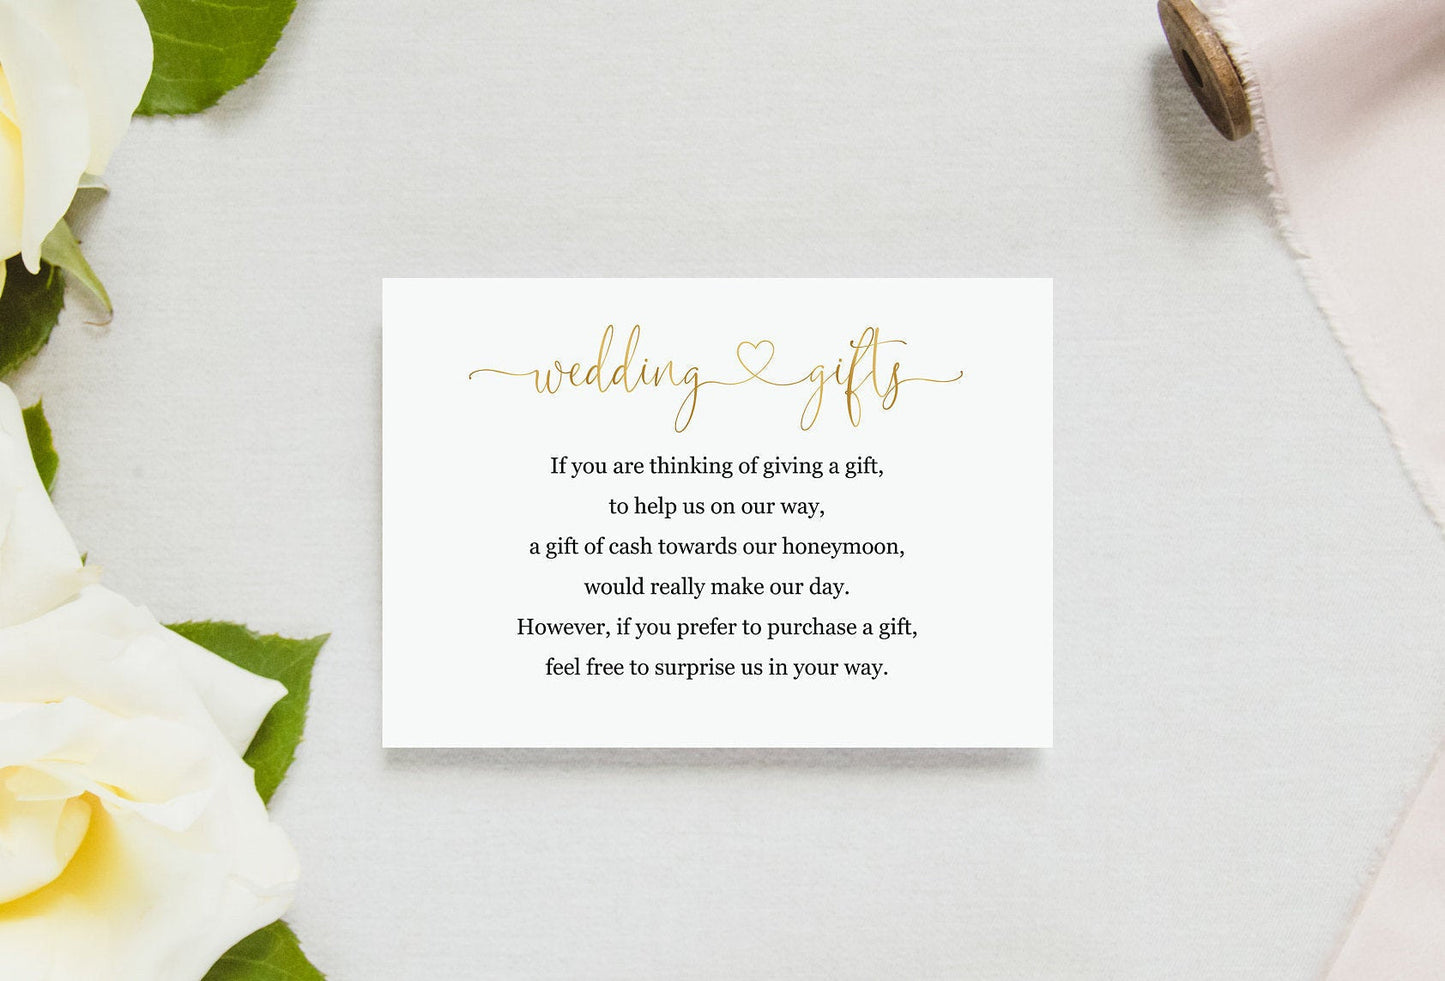 Wedding Gifts Card Template, Honeymoon Fund, Honeymoon Request, Wish Card, Wedding Insert Gold - Heather TAGS | TY | INSERTS SAVVY PAPER CO